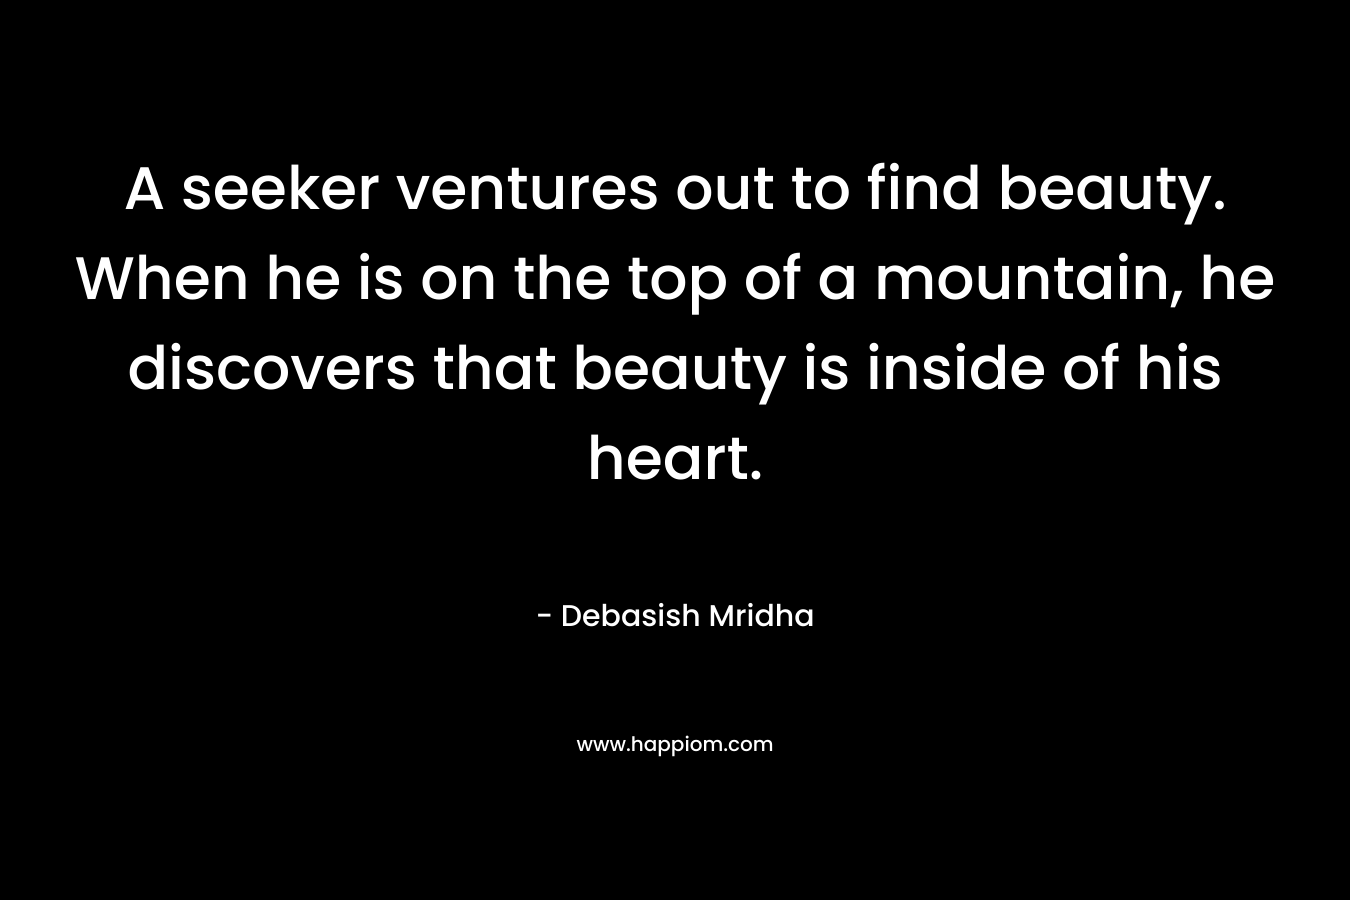 A seeker ventures out to find beauty. When he is on the top of a mountain, he discovers that beauty is inside of his heart. – Debasish Mridha